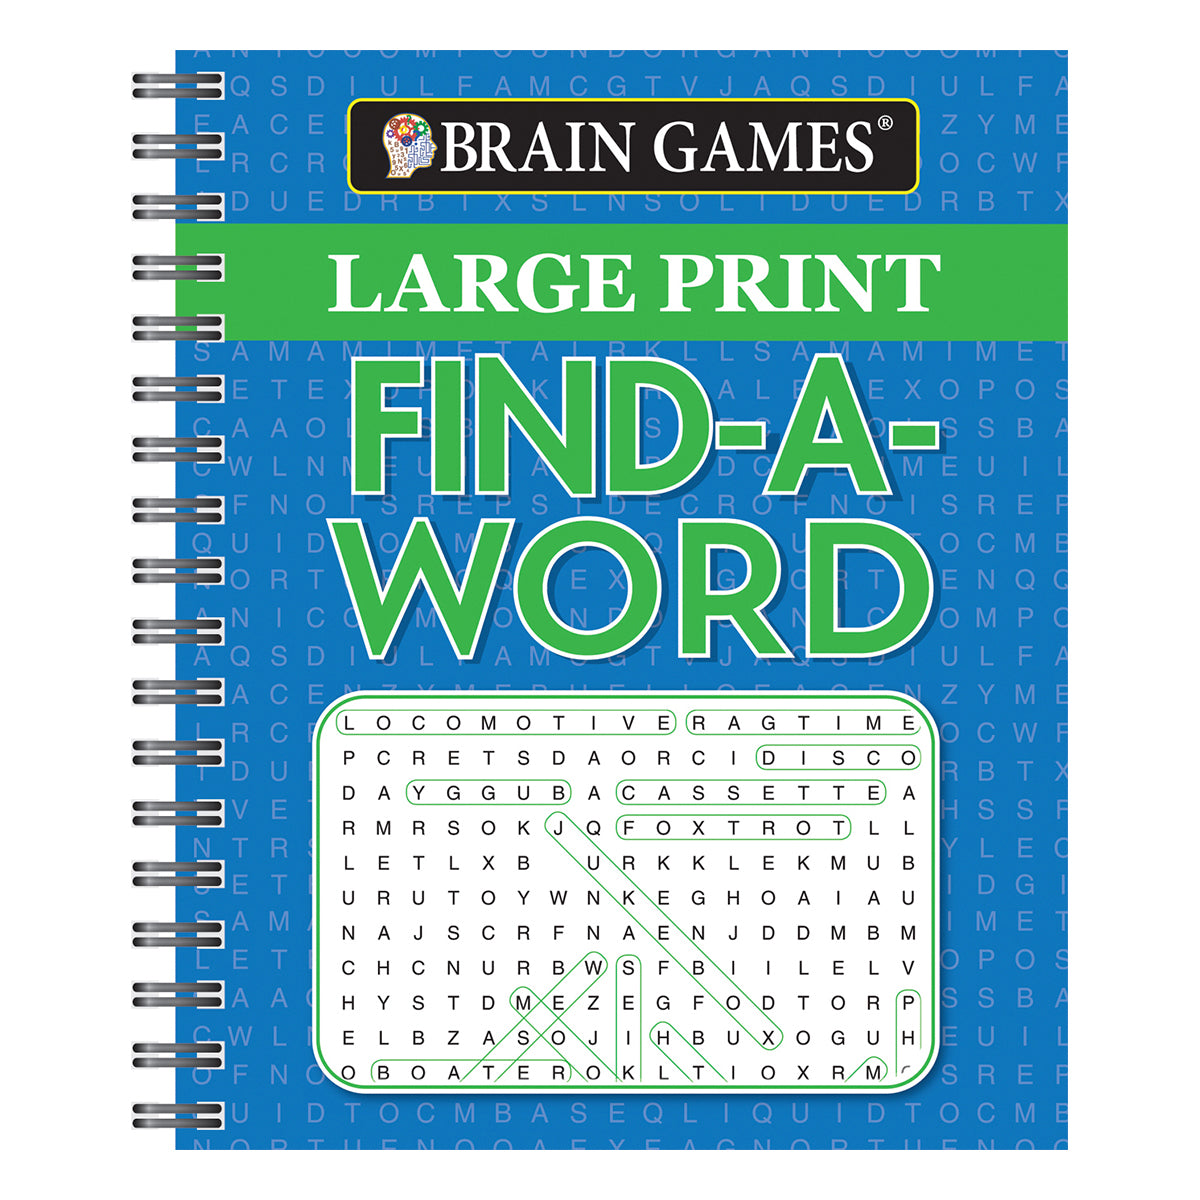 Brain Games  Large Print Find a Word